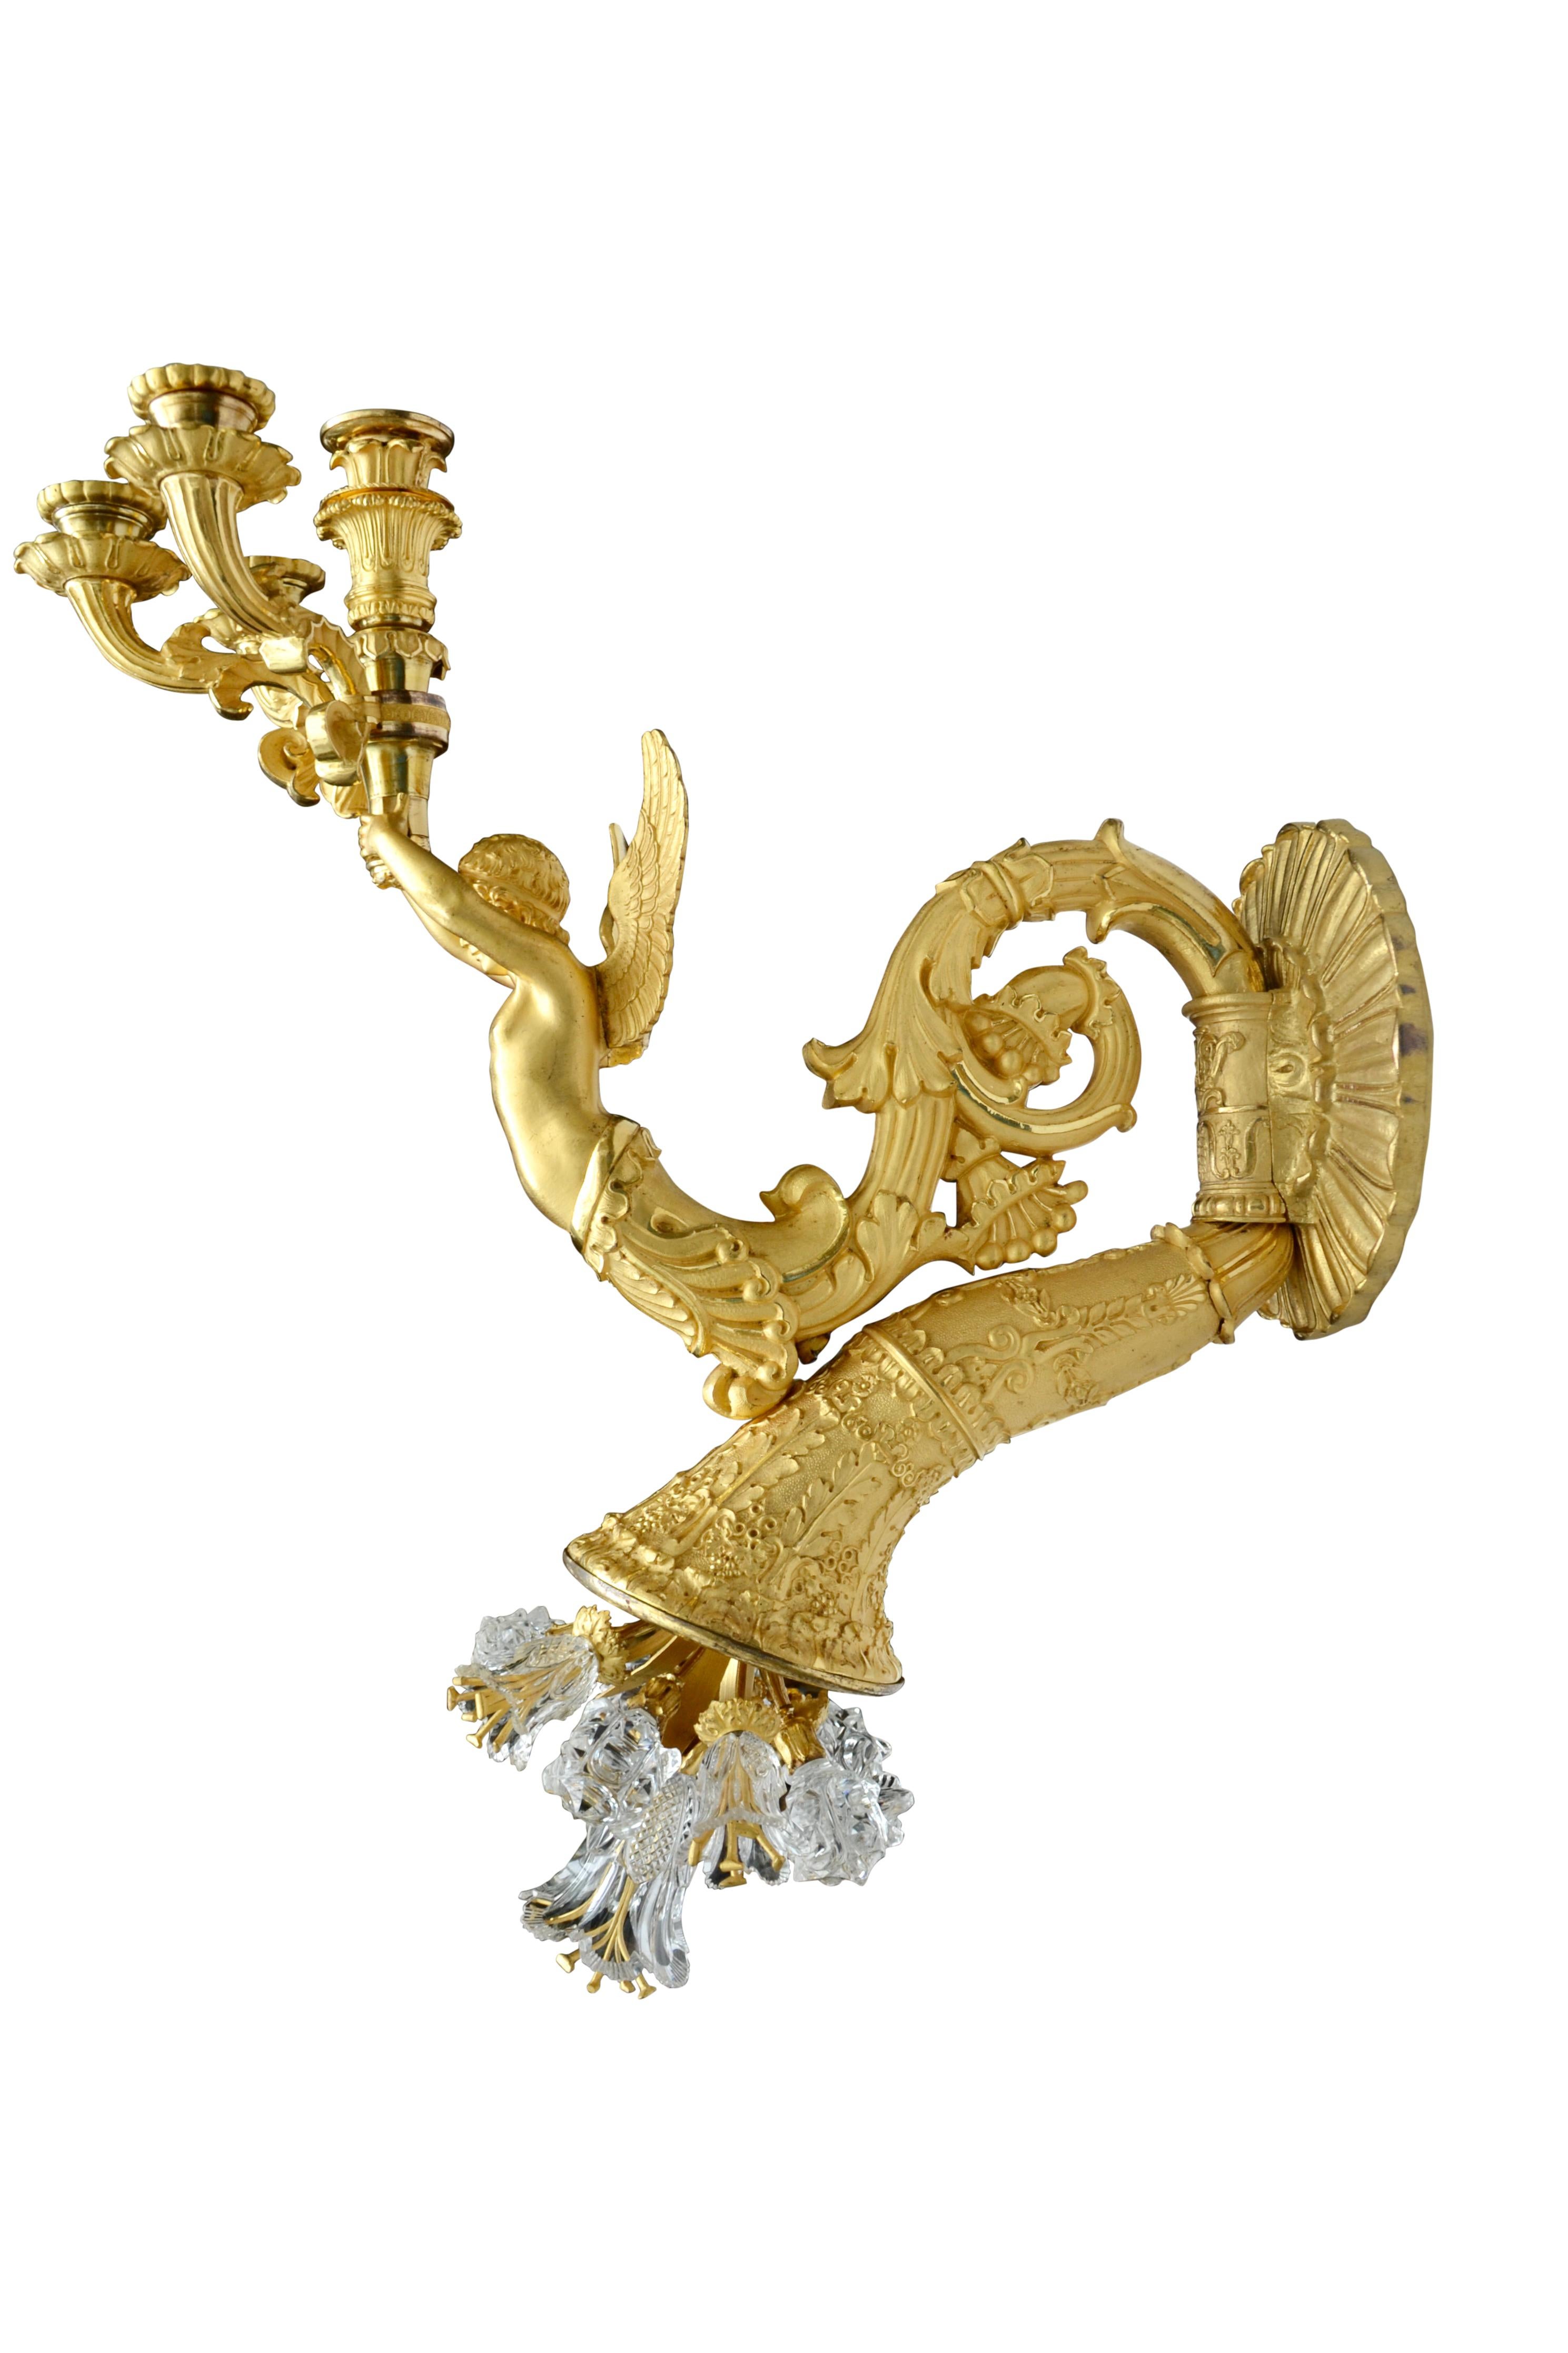 Large French Empire Gilt Bronze and Crystal Sconce Attributed to Thomire For Sale 4